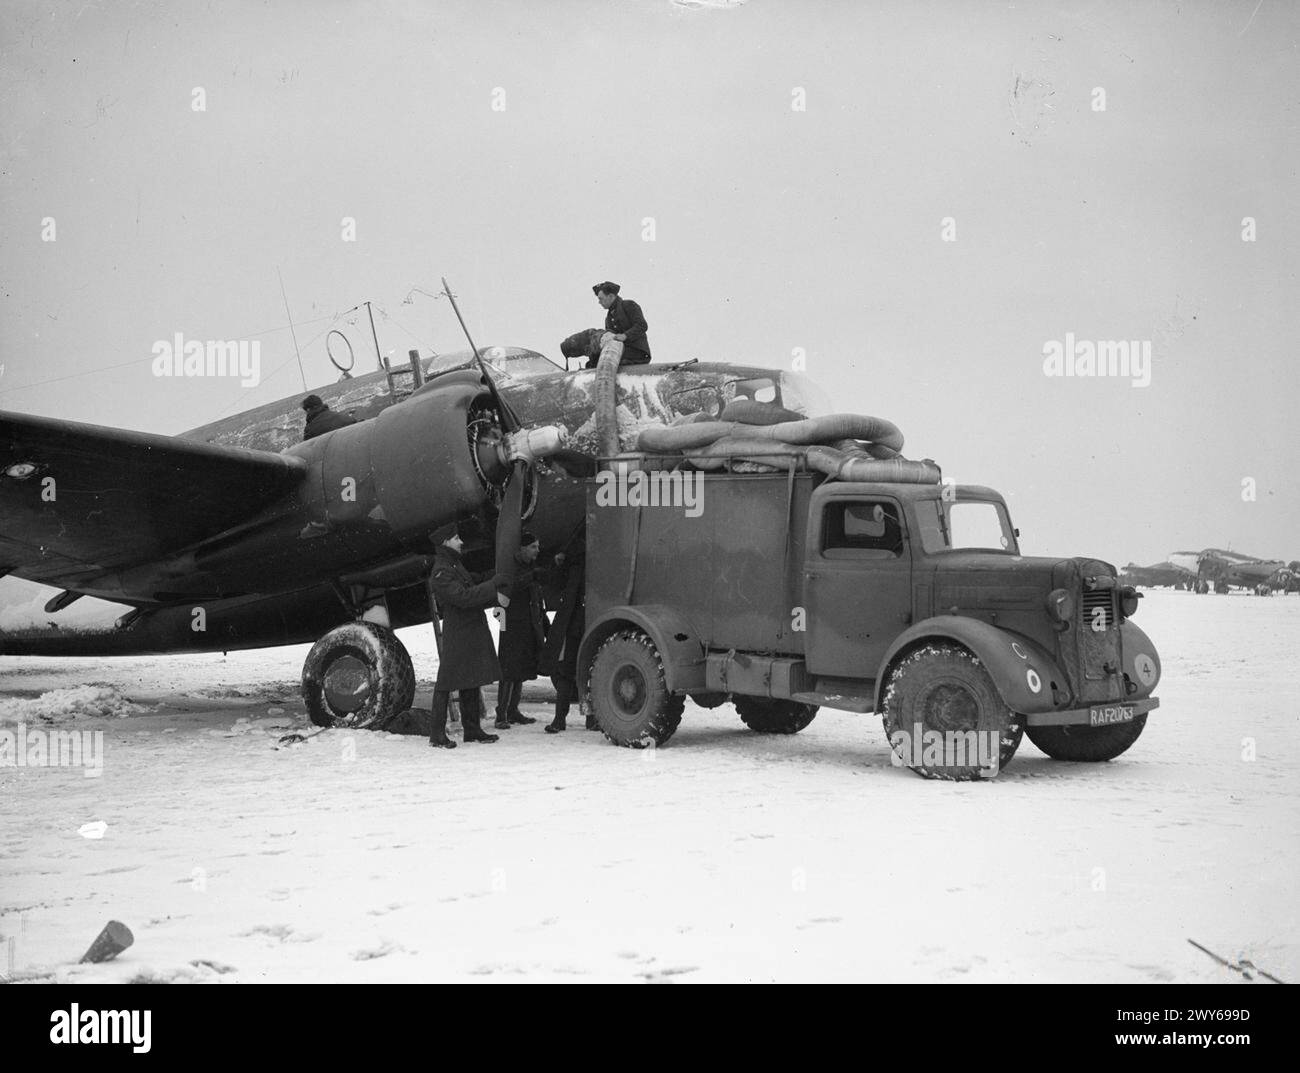 ROYAL AIR FORCE 1939-1945: COASTAL COMMAND - Ground staff prepare a No 233 Squadron Hudson for flight in freezing conditions at Thorney Island, 19 January 1942. The 'hot air van' has been brought in to warm up the engines and de-ice the cockpit windscreen. , Royal Air Force, Maintenance Unit, 235 Stock Photo